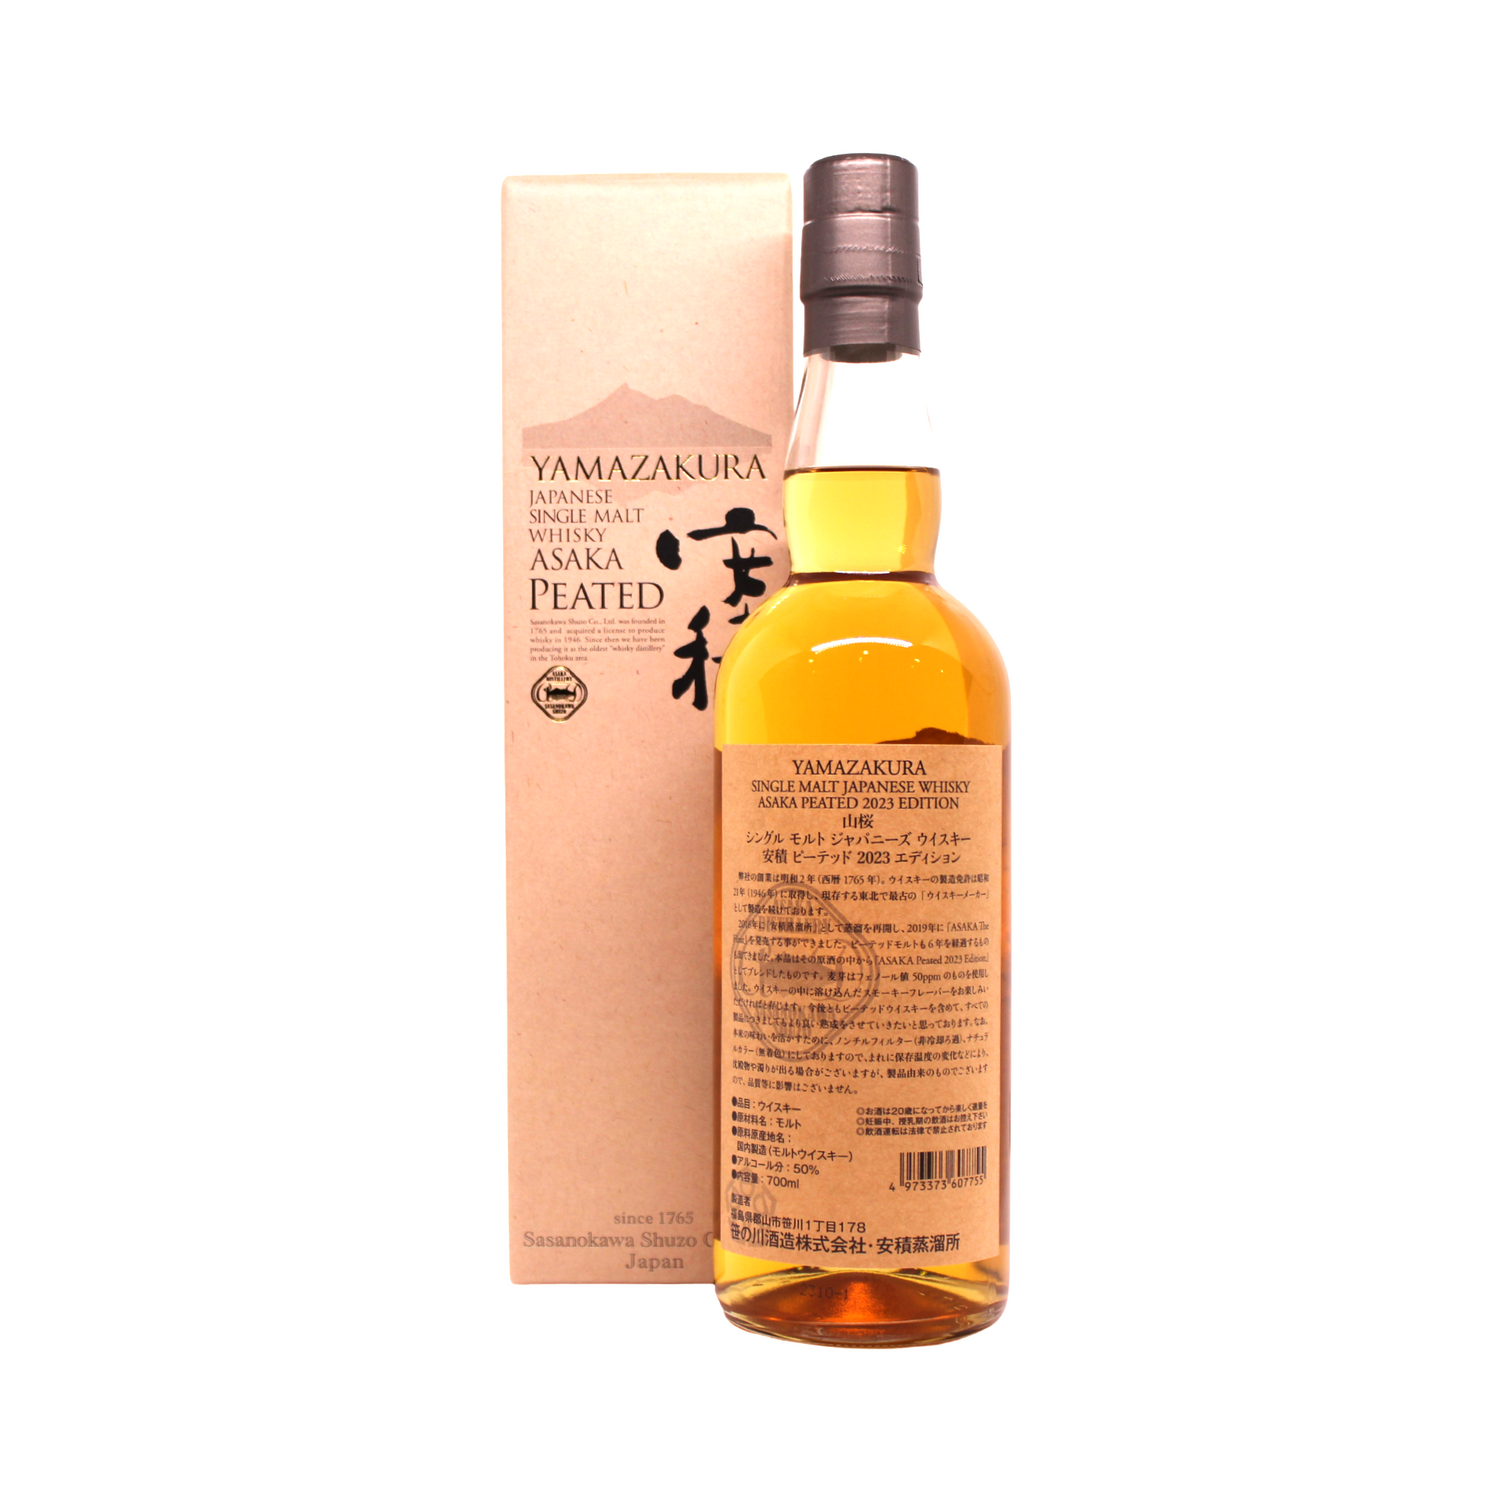 This is a 2023 Edition of their PEATED Single Malt Whisky which has been largely matured in Bourbon barrels.<span>&nbsp; While most of the Asaka Distillery produces Non-Peated Single Malt, they occasionally release a Peated bottling from time to time as well in limited quantities.</span>